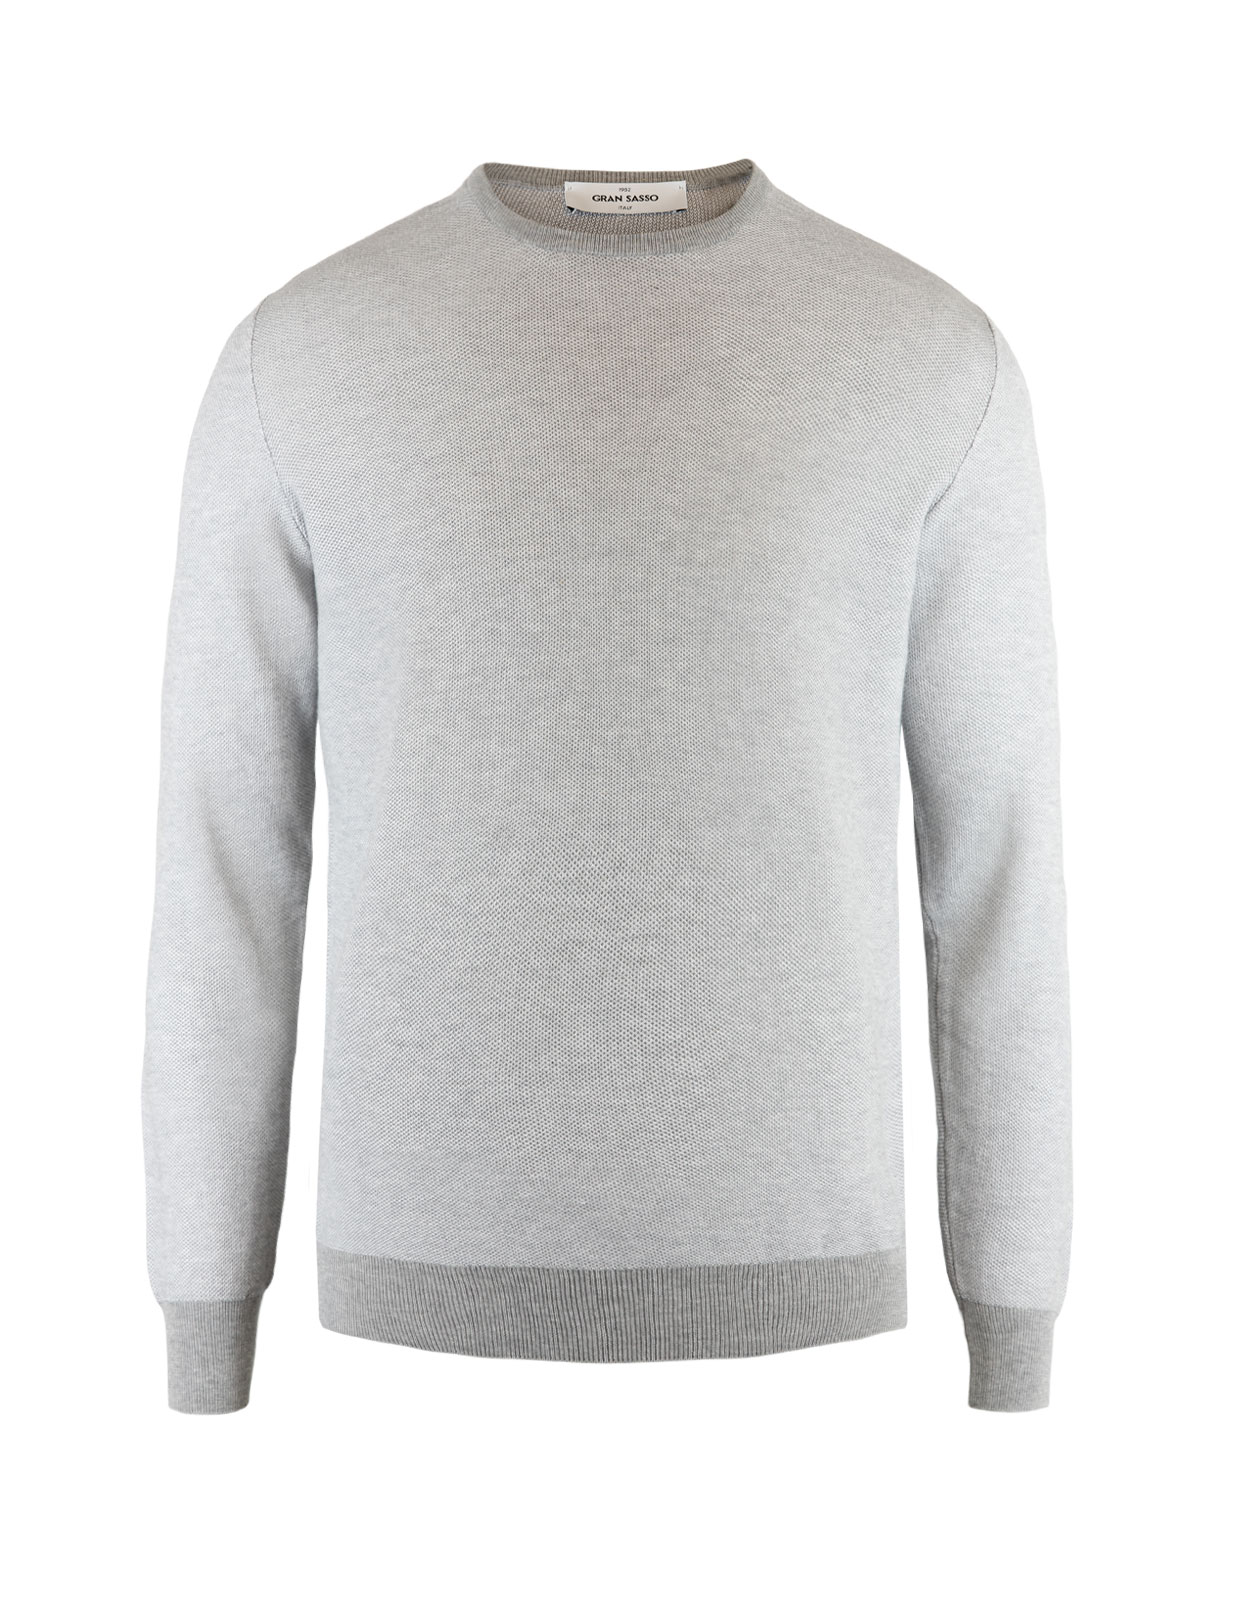 Contrast Crew Neck Knitted Cotton Light Grey